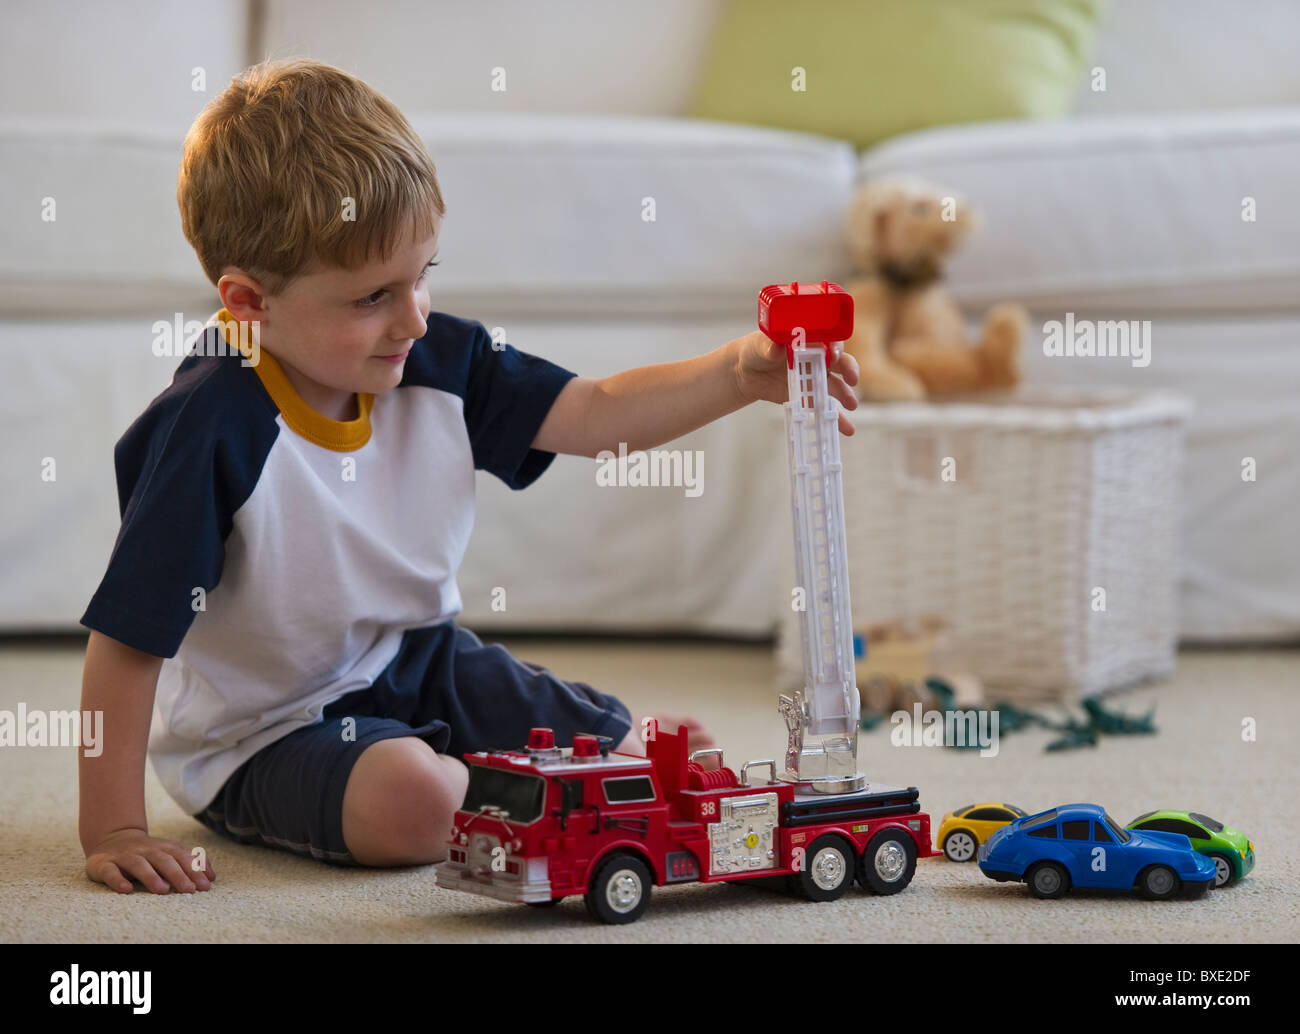 Young boy playing with toy fire truck Stock Photo